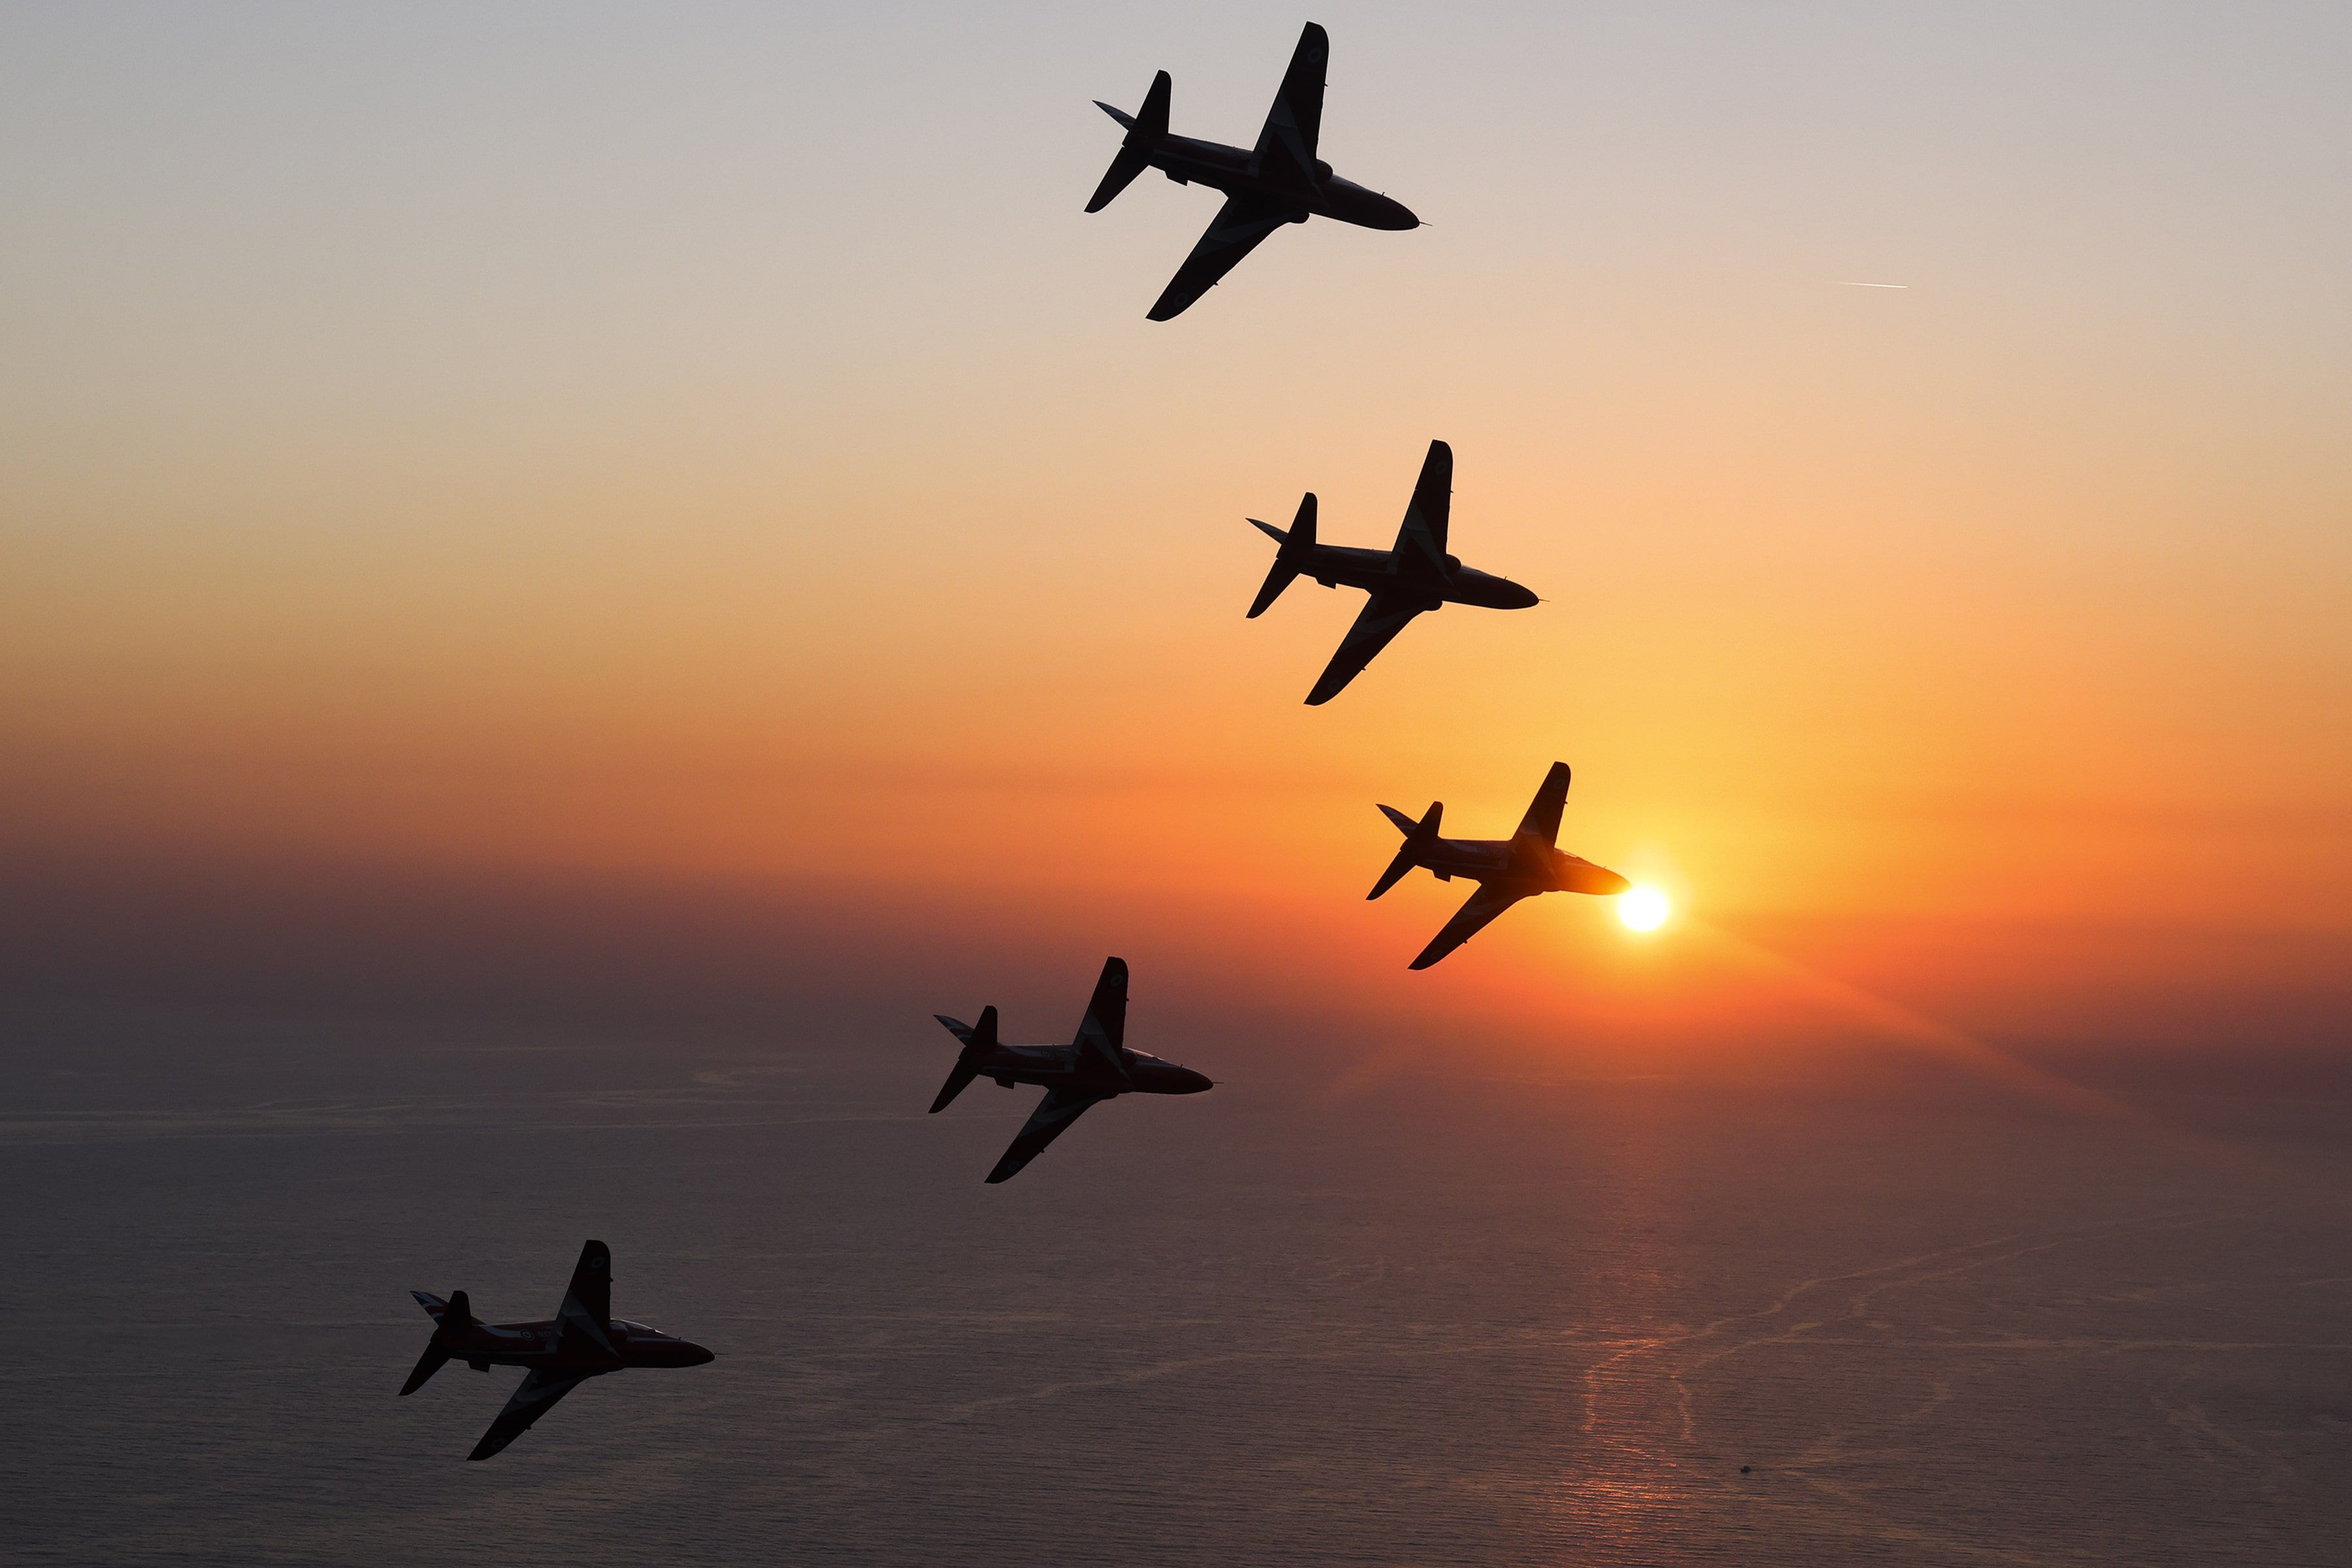 RAF aircraft flying in formation towards the sunset